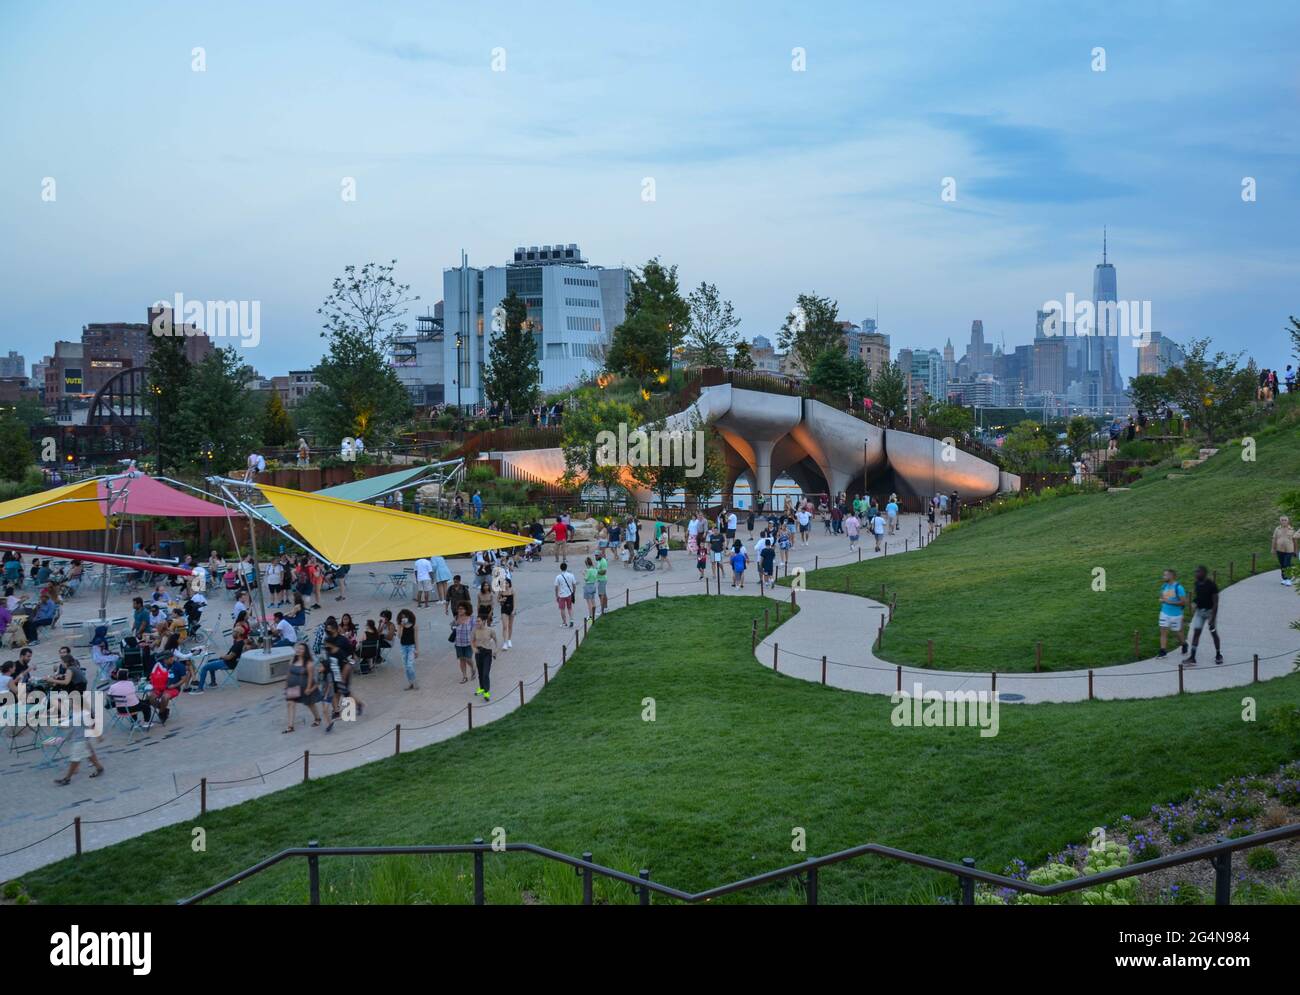 New York City’s newest park “The Little Island” at Pier 55 in Manhattan opened recently. People are seen enjoying summer afternoon at the park. Stock Photo